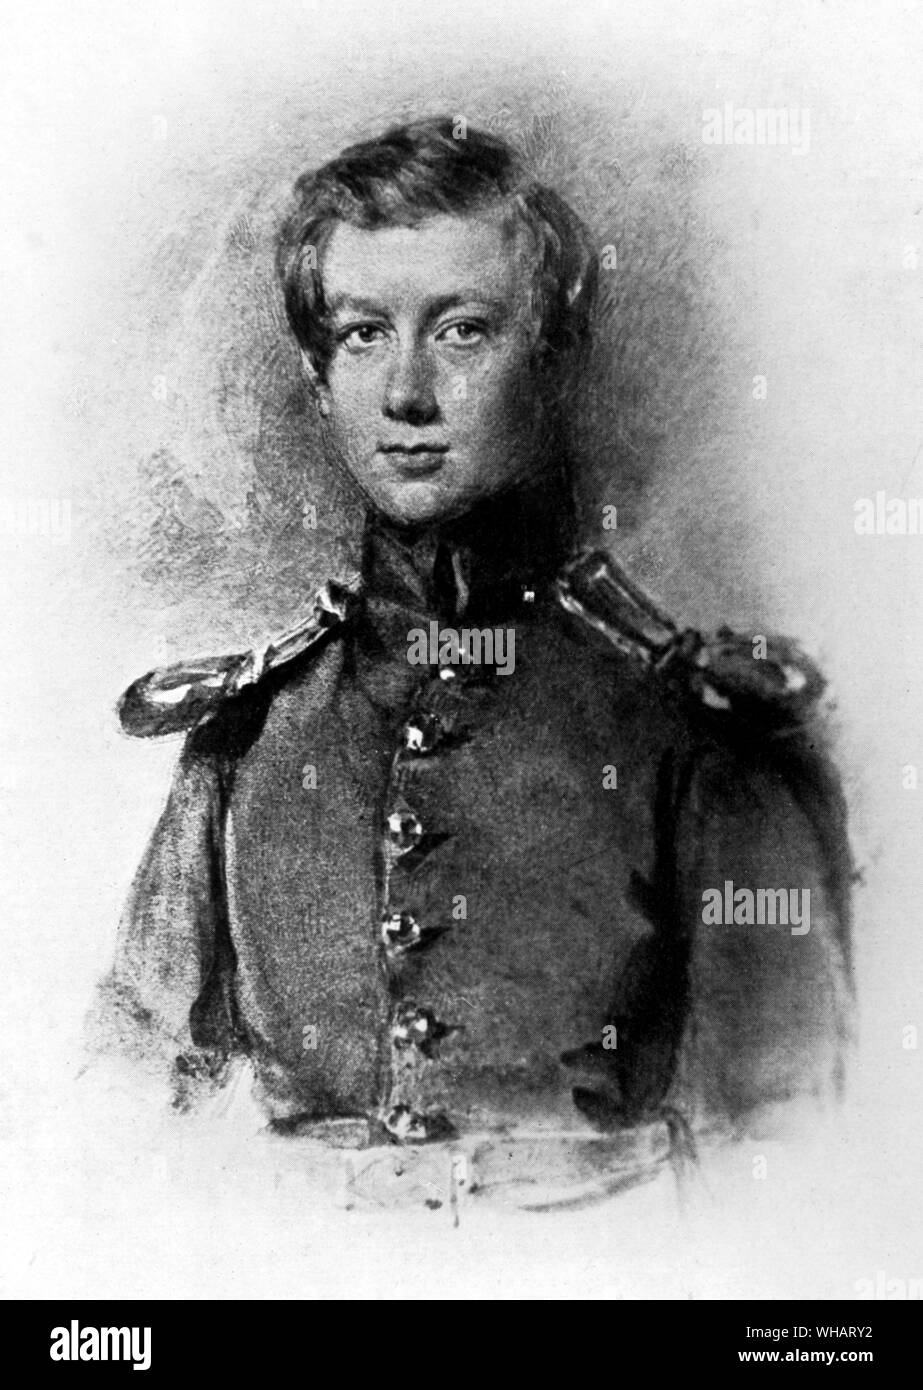 John Hanning Speke. At the age of 17 on first receiving his comission in the Indian Army. . John Hanning Speke b. May 4, 1827-d. September 15, 1864 was an officer in the British Indian army, who made three voyages of exploration to Africa. He also created the Hamitic hypothesis, a major cause of the Rwandan genocide.. Stock Photo